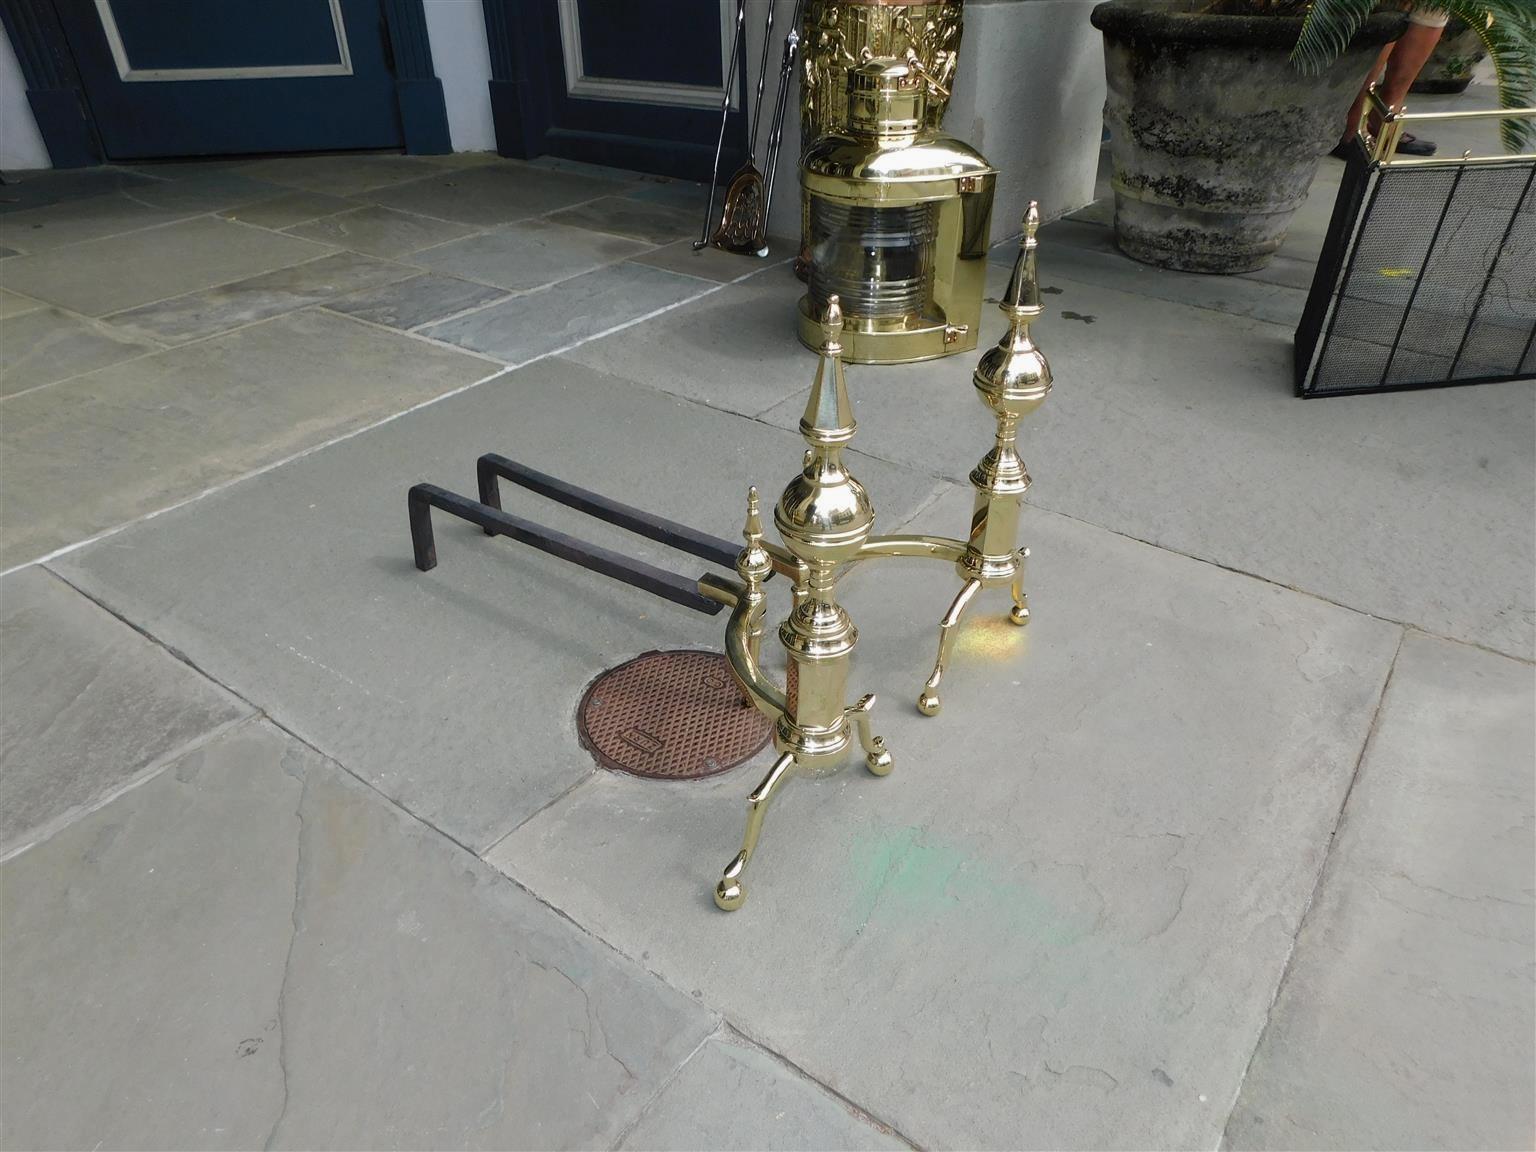 Pair of American brass banded flanking steeple and ball finial andirons with ringed faceted plinths, curvature supporting matching steeple log stops, original wrought iron rear dog legs, and resting on spur legs with ball feet. New York, Early 19th